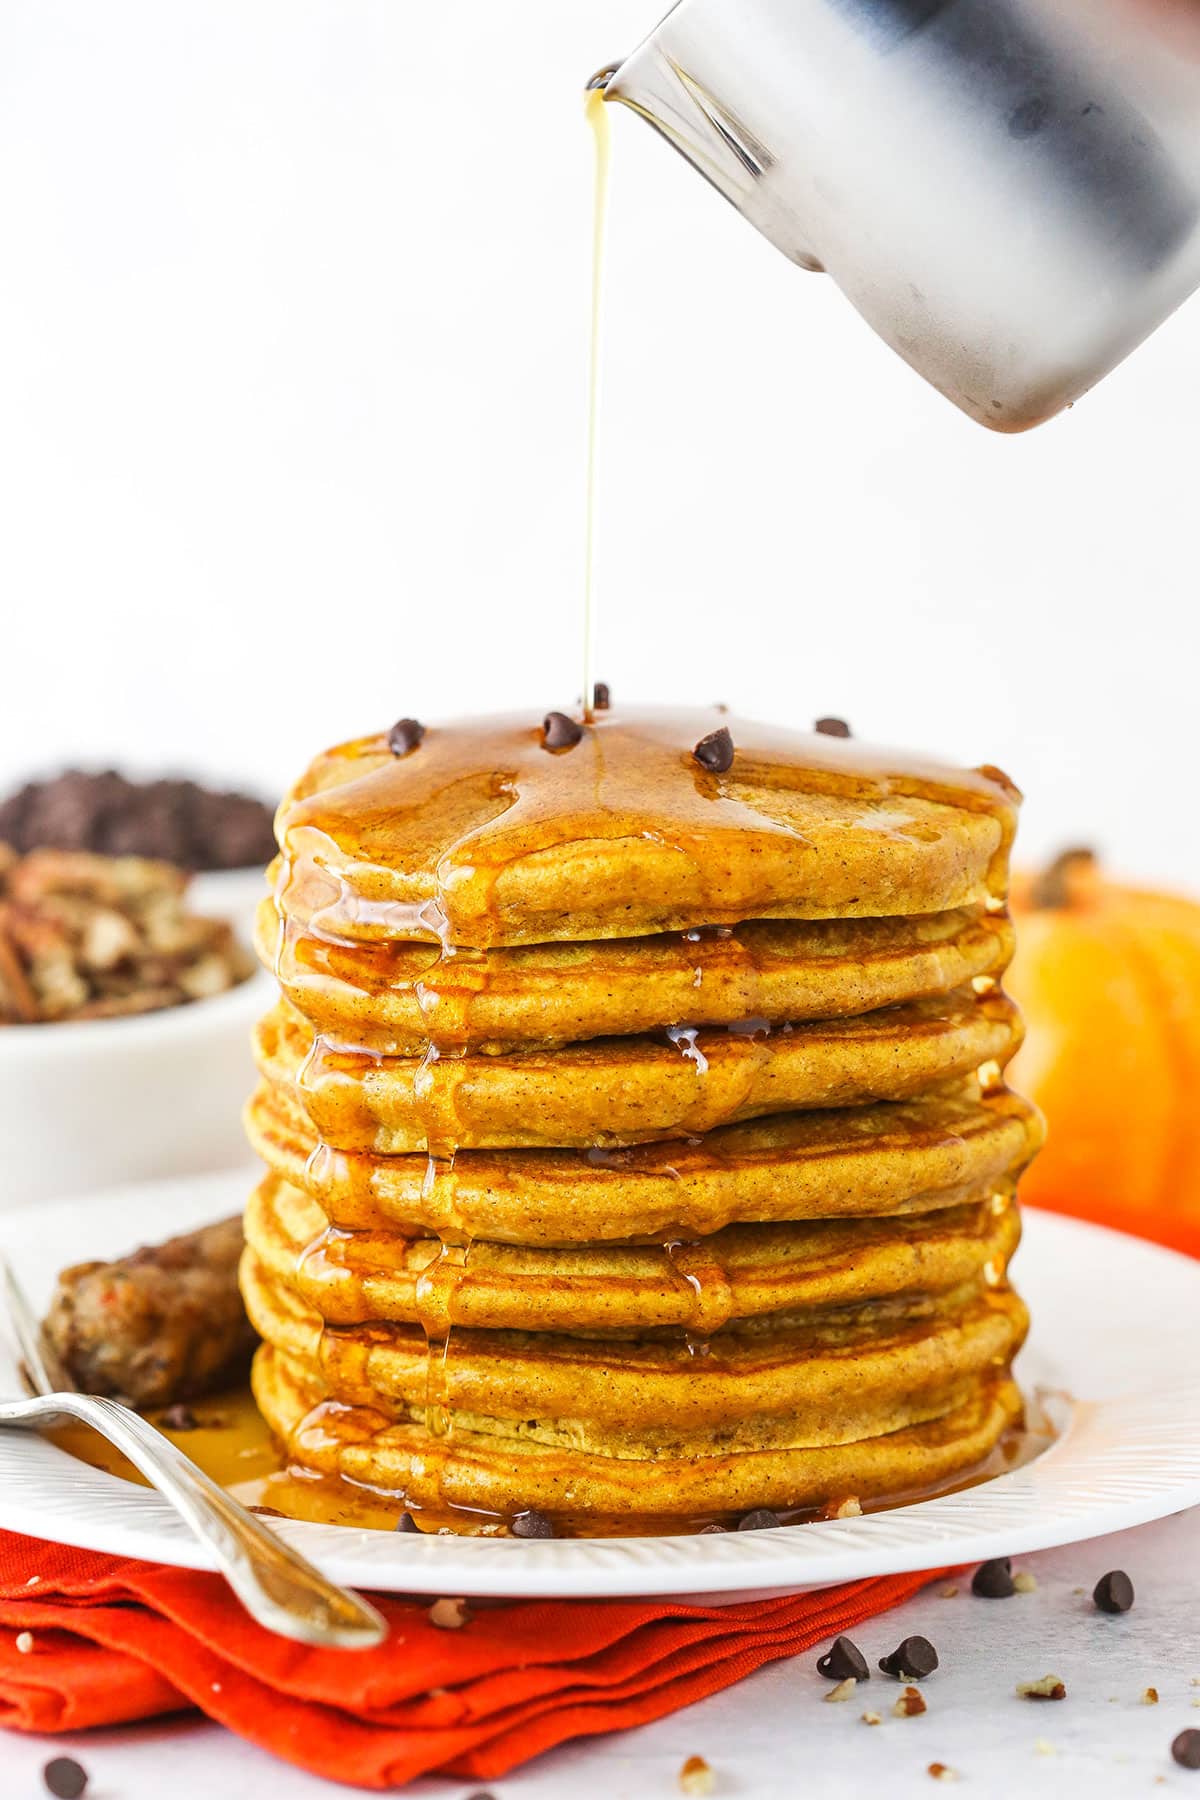 Pouring maple syrup over a pile of pumpkin pancakes.